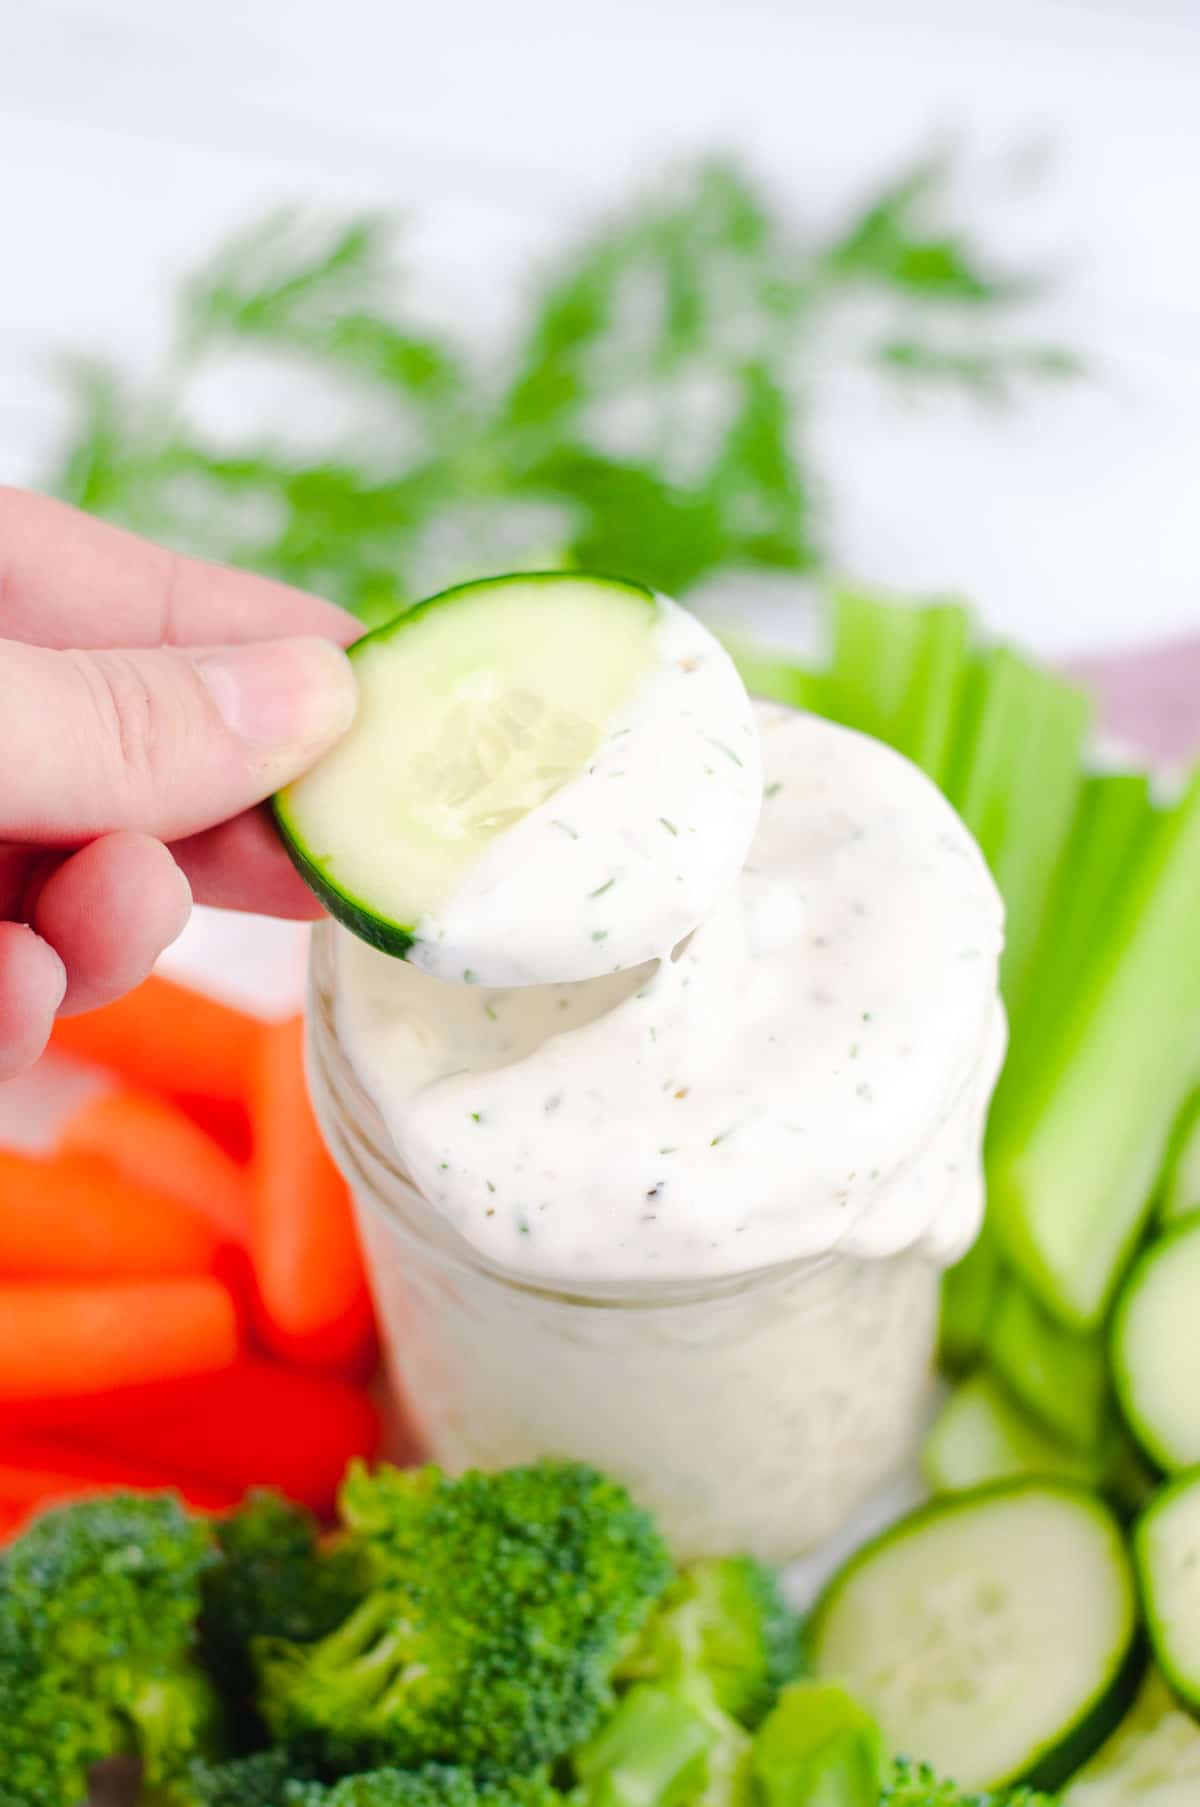 Slice of cucumber being lifted out of jar of ranch